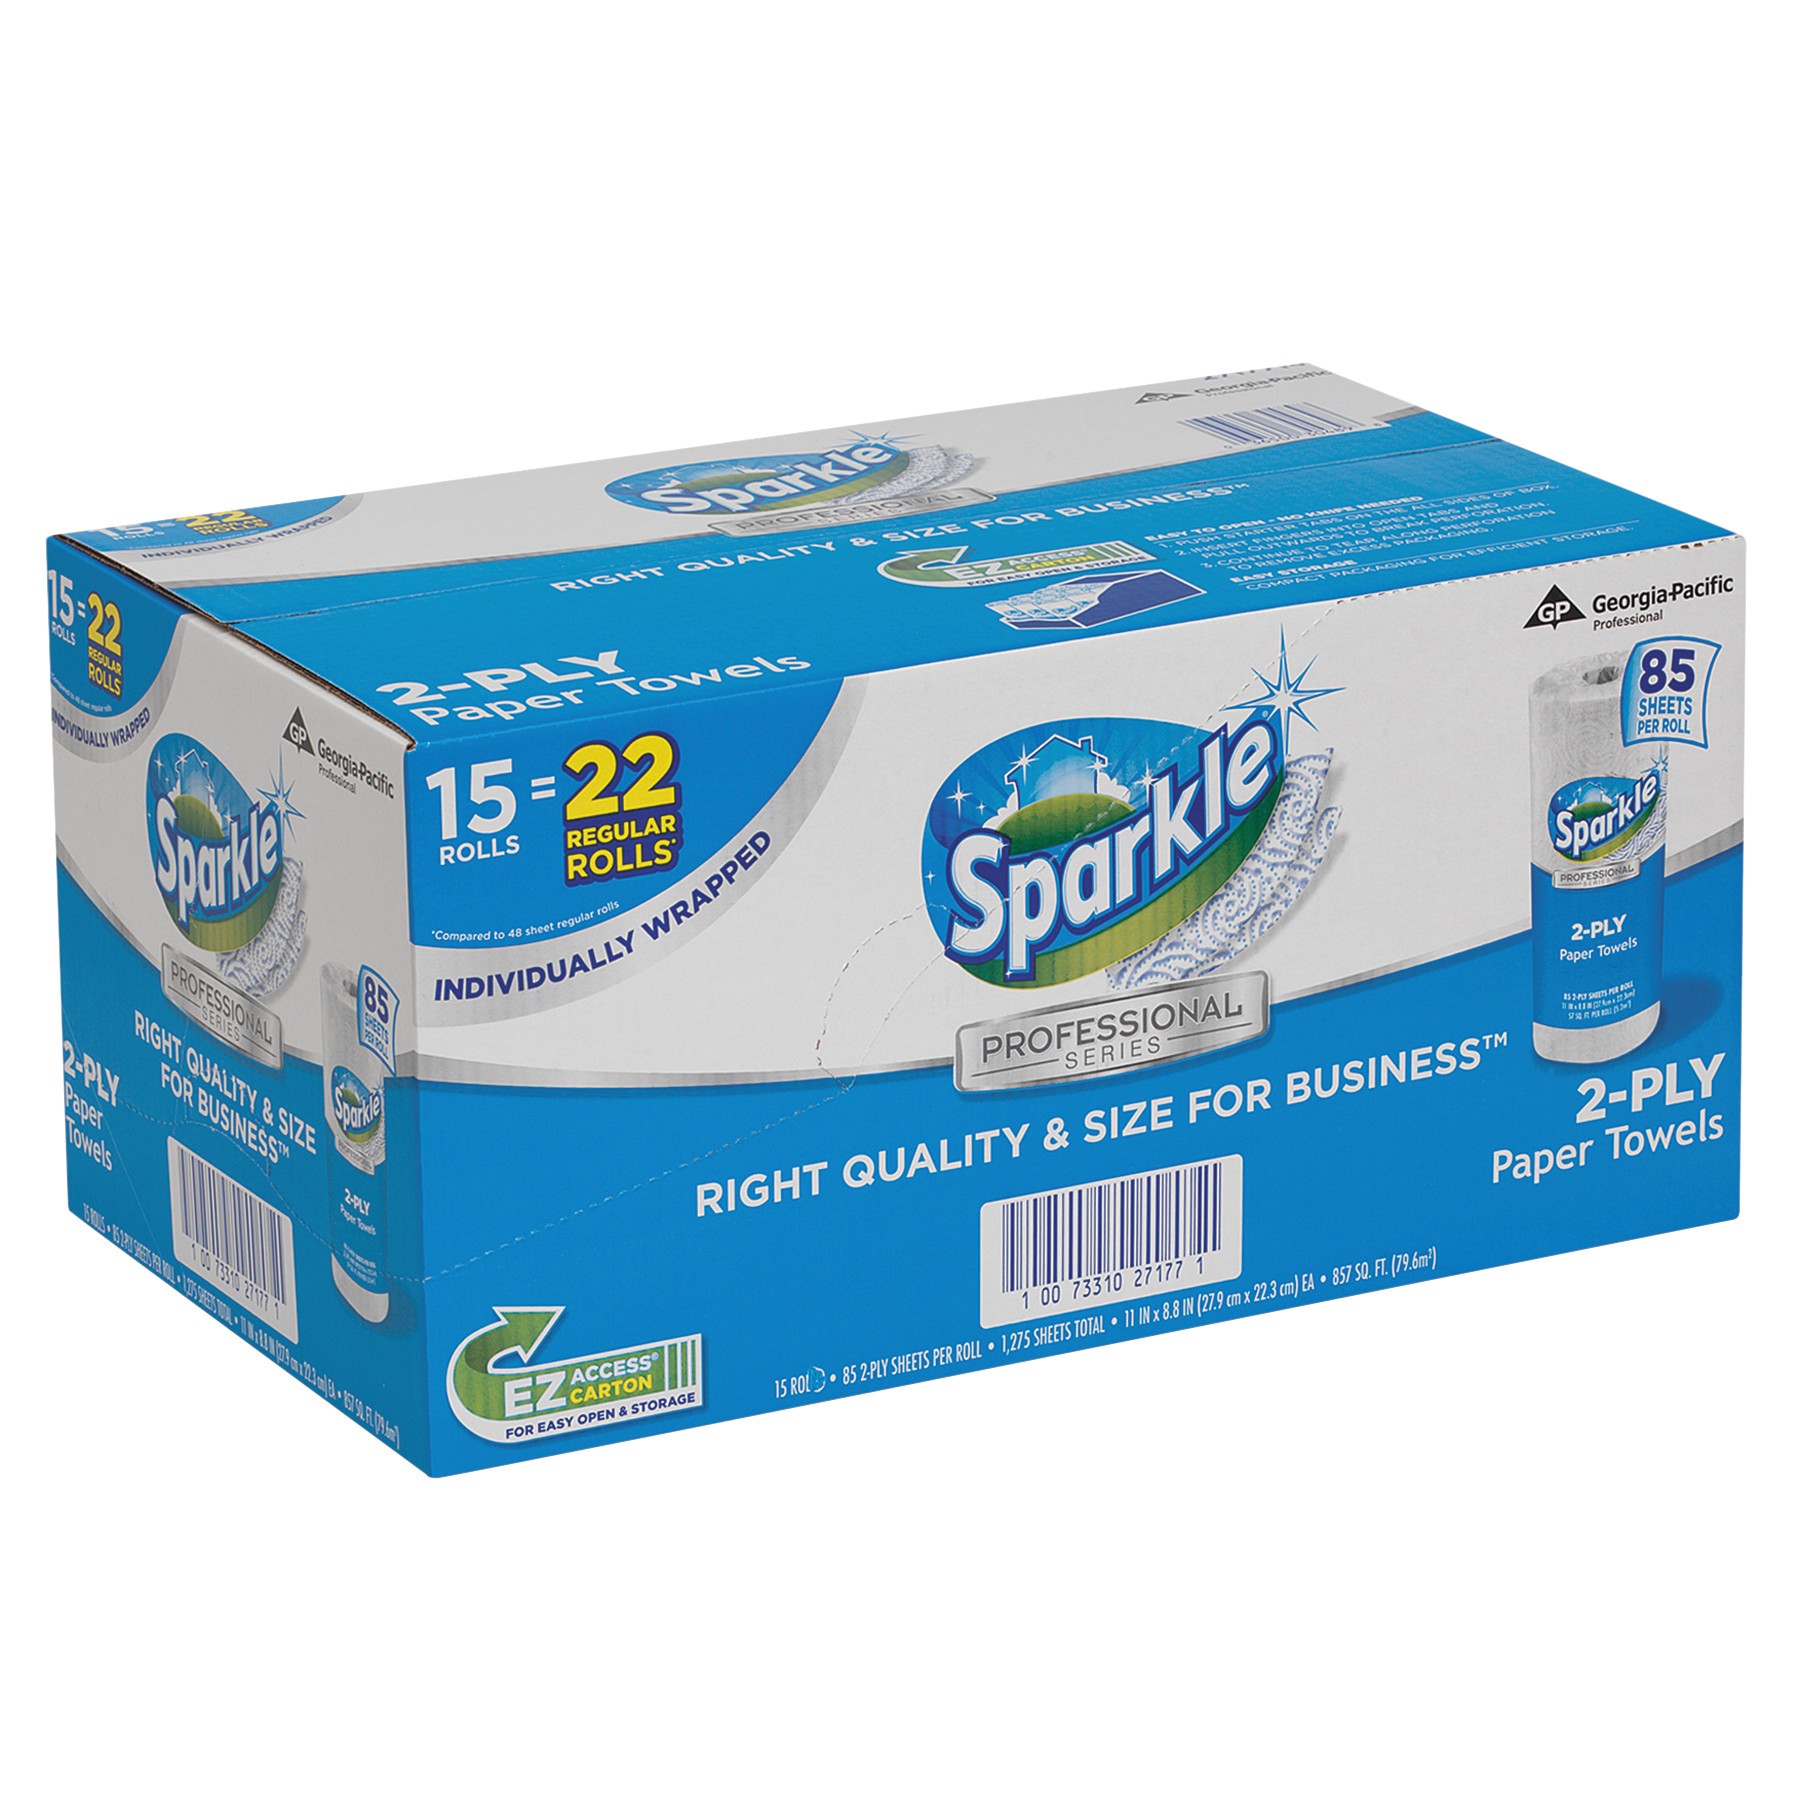 Sparkle Professional Series Kitchen Paper Towel Rolls - 2 Ply - 8.80" x 11" - 85 Sheets/Roll - White - Absorbent, Individua